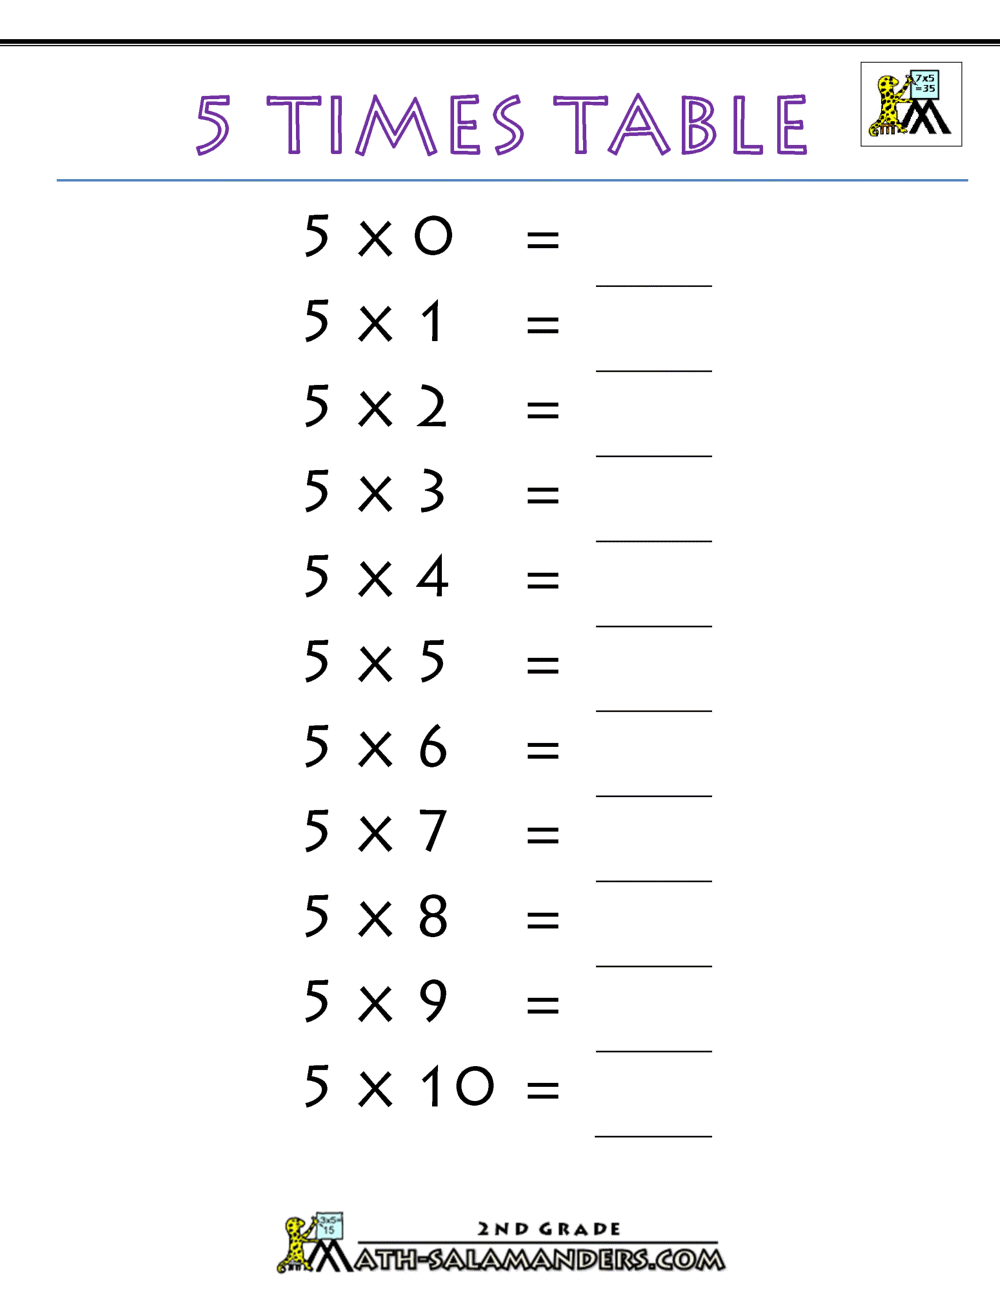 5-times-table-5-times-table-multiplication-worksheets-5-times-table